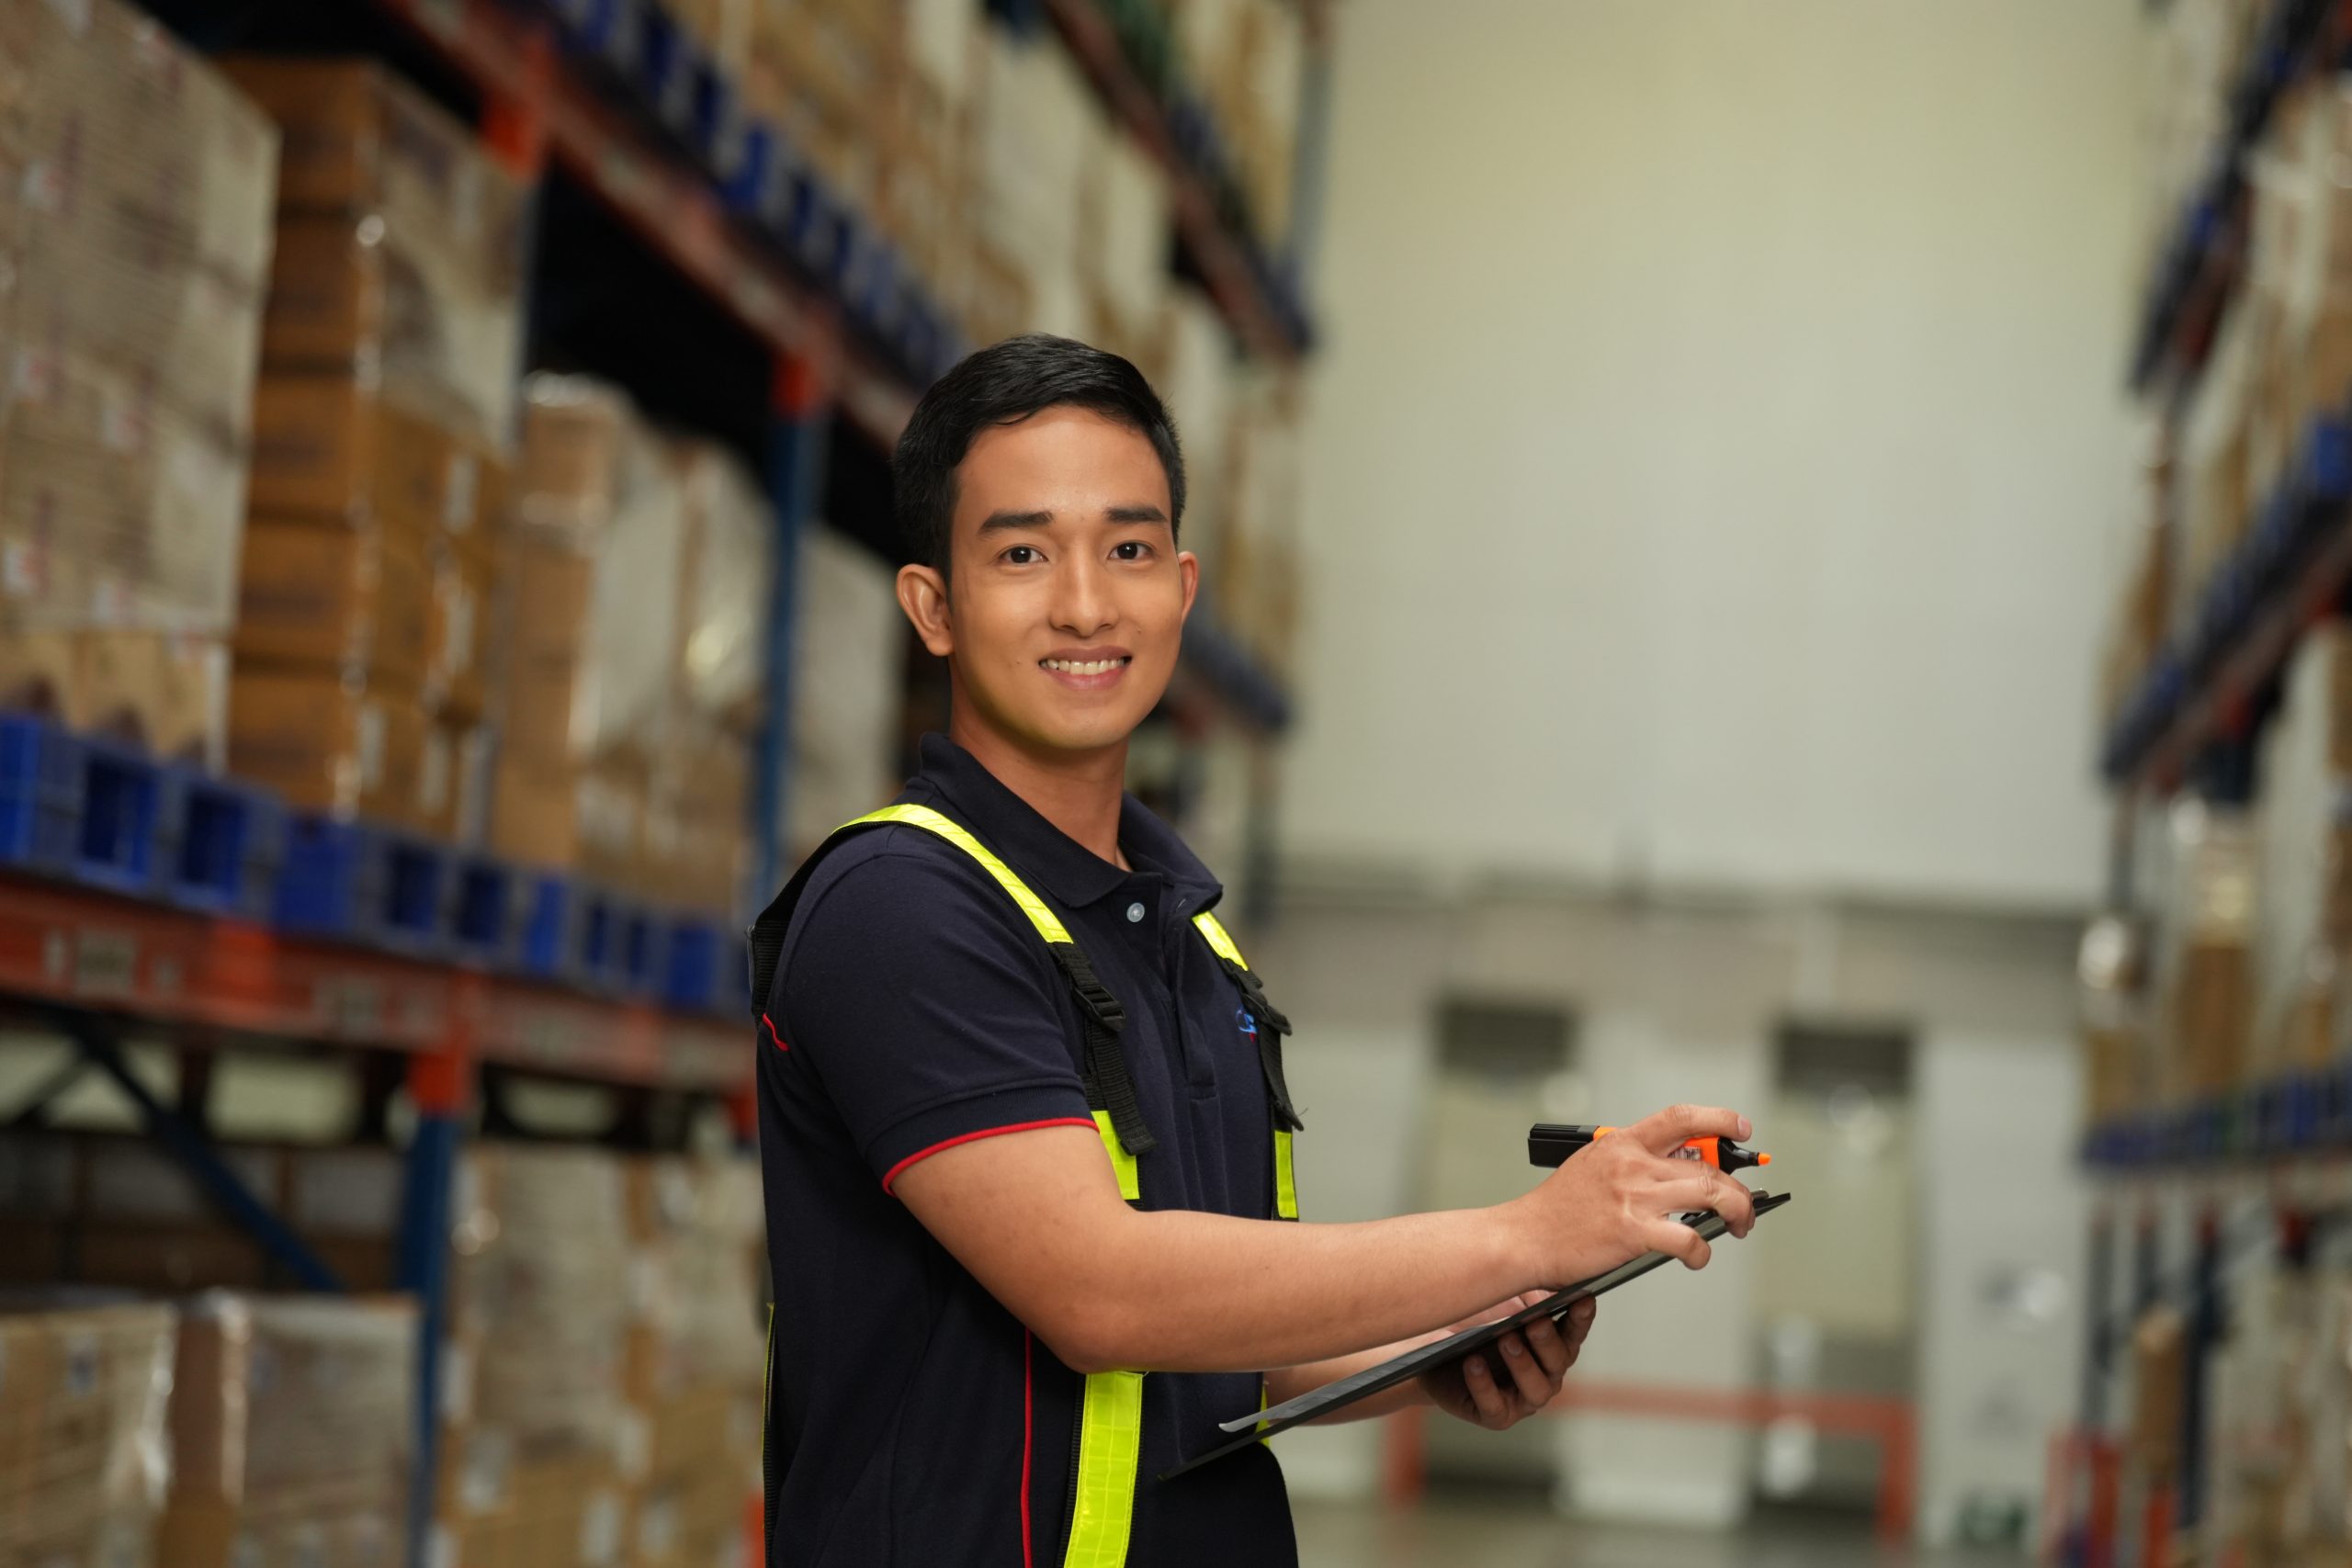 man inside a warehouse or employed in a company providing logistics solutions